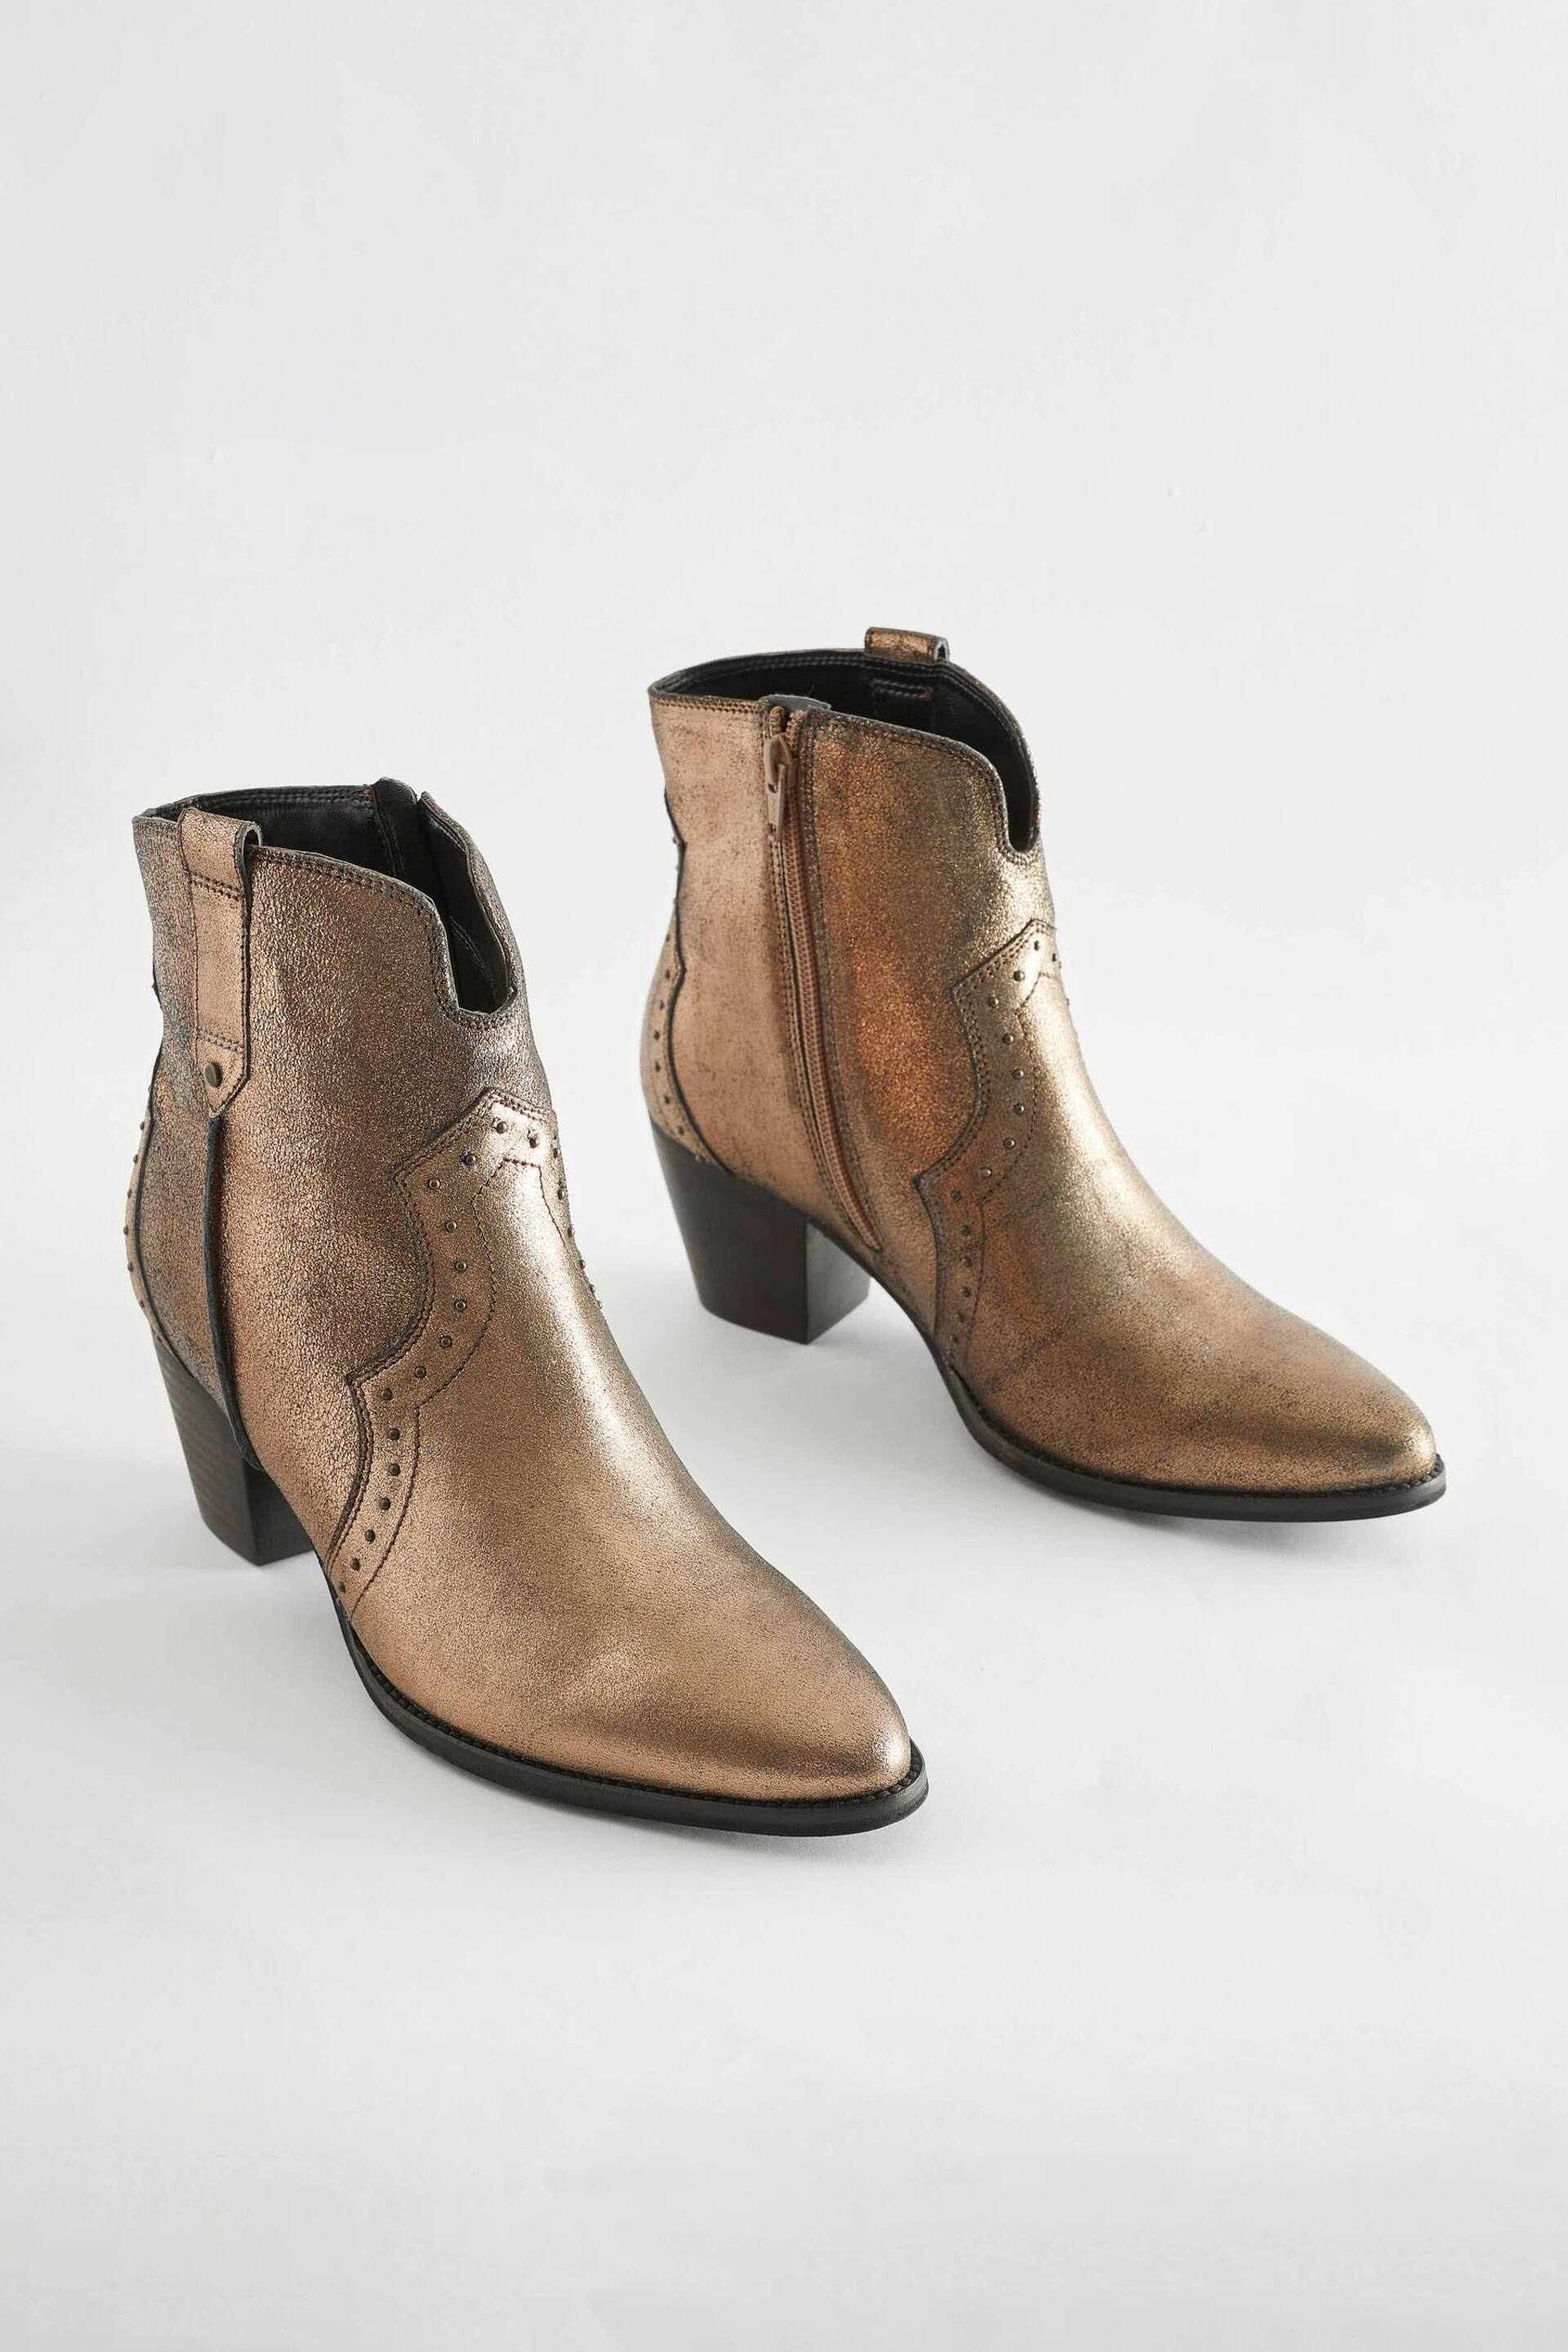 Metallic Extra Wide Fit Forever Comfort® Leather Cowboy/Western Boots - Image 1 of 5